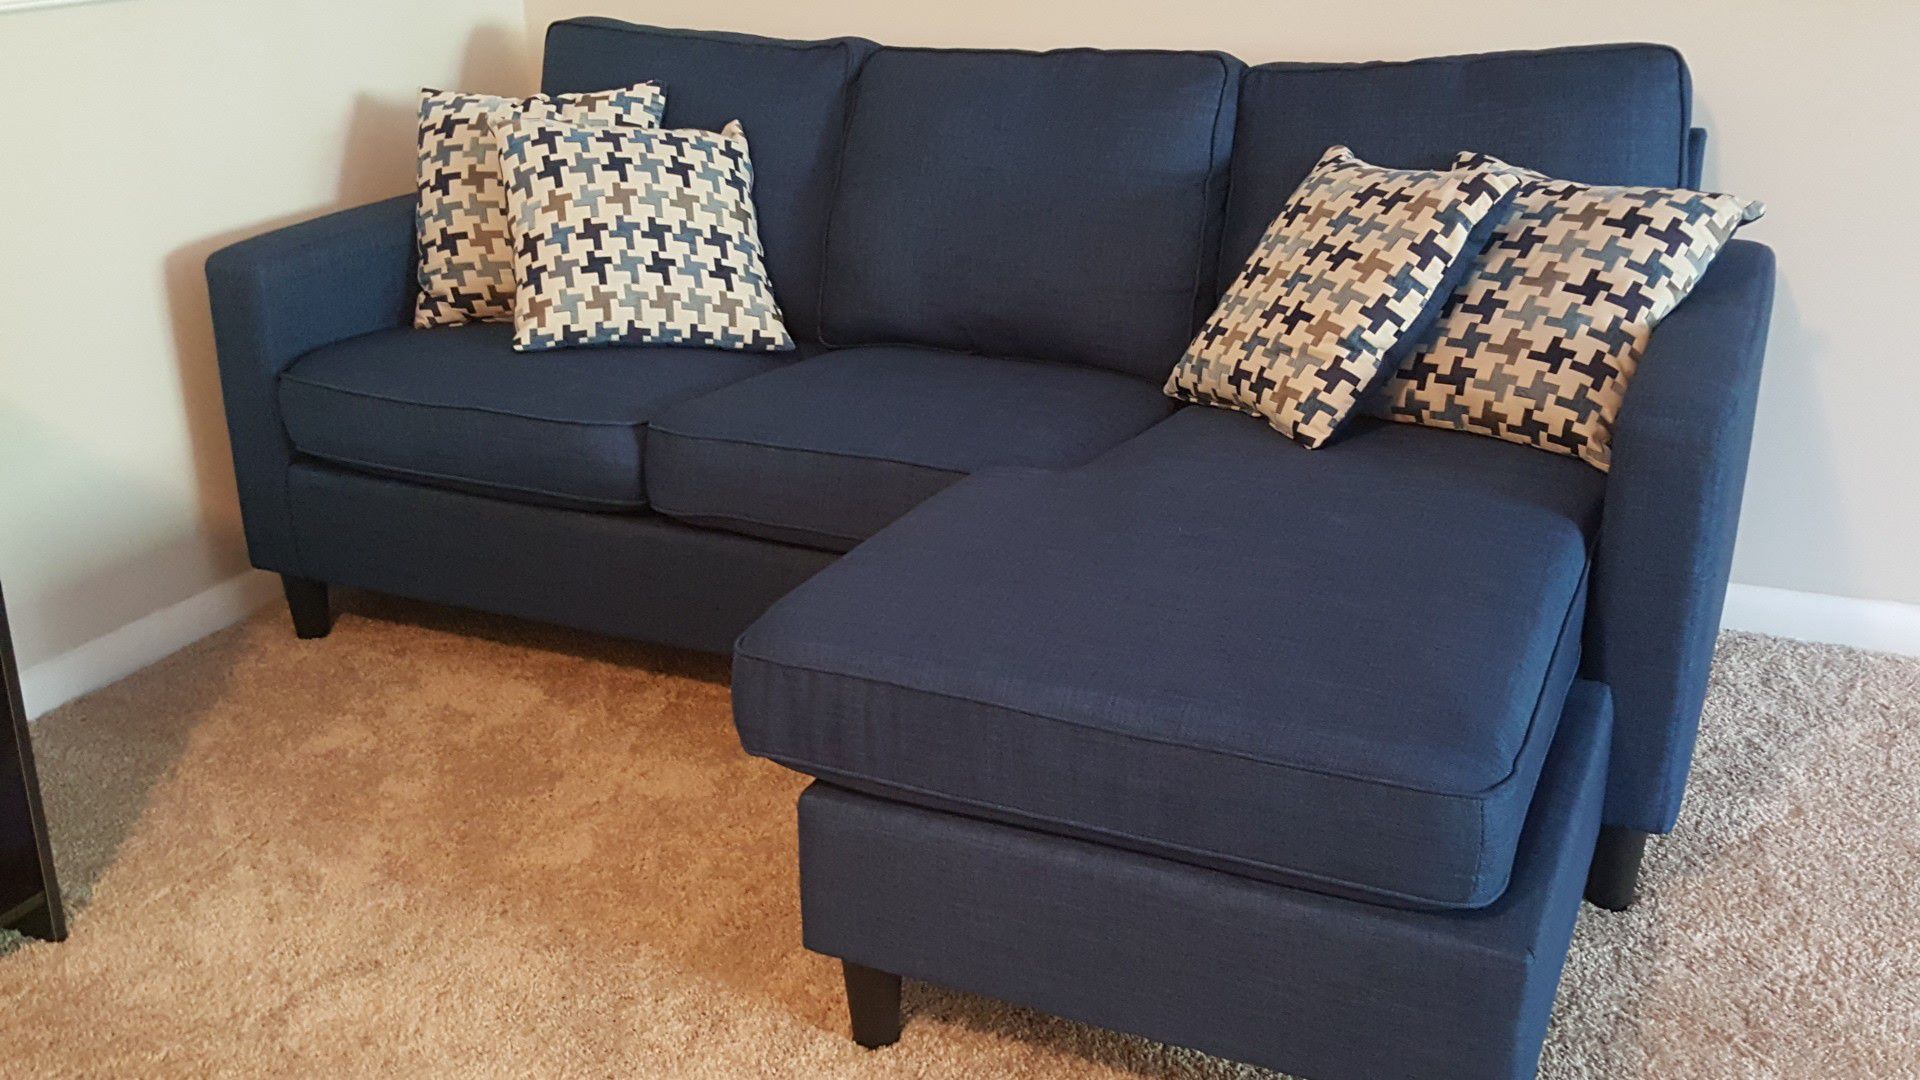 Barely used Bob's Furniture Blue L Couch